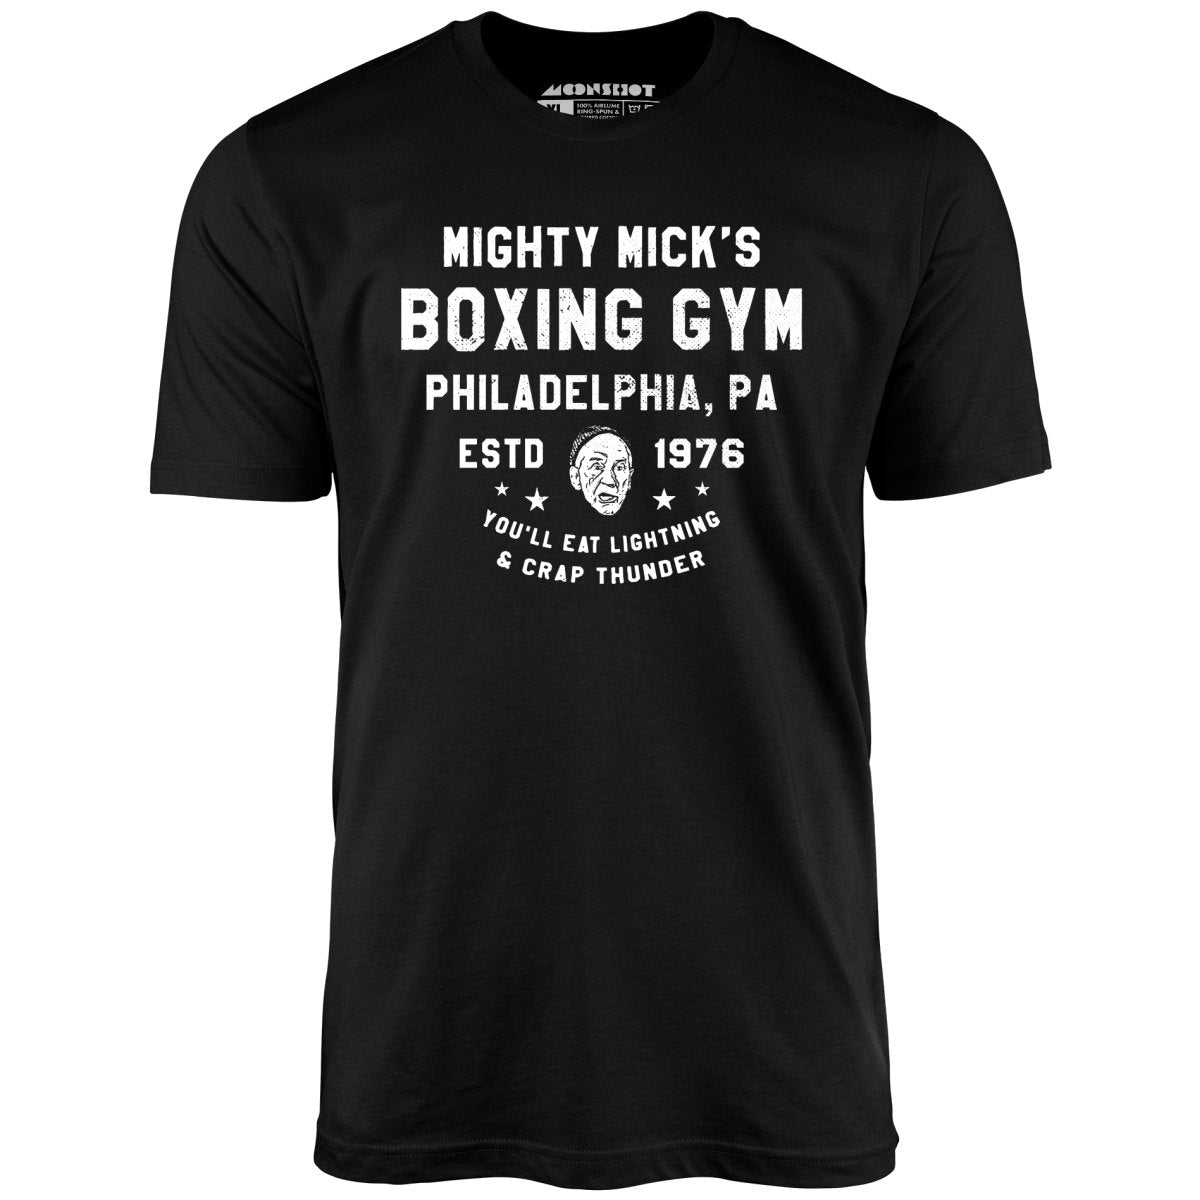 Mighty Mick's Boxing Gym - Unisex T-Shirt